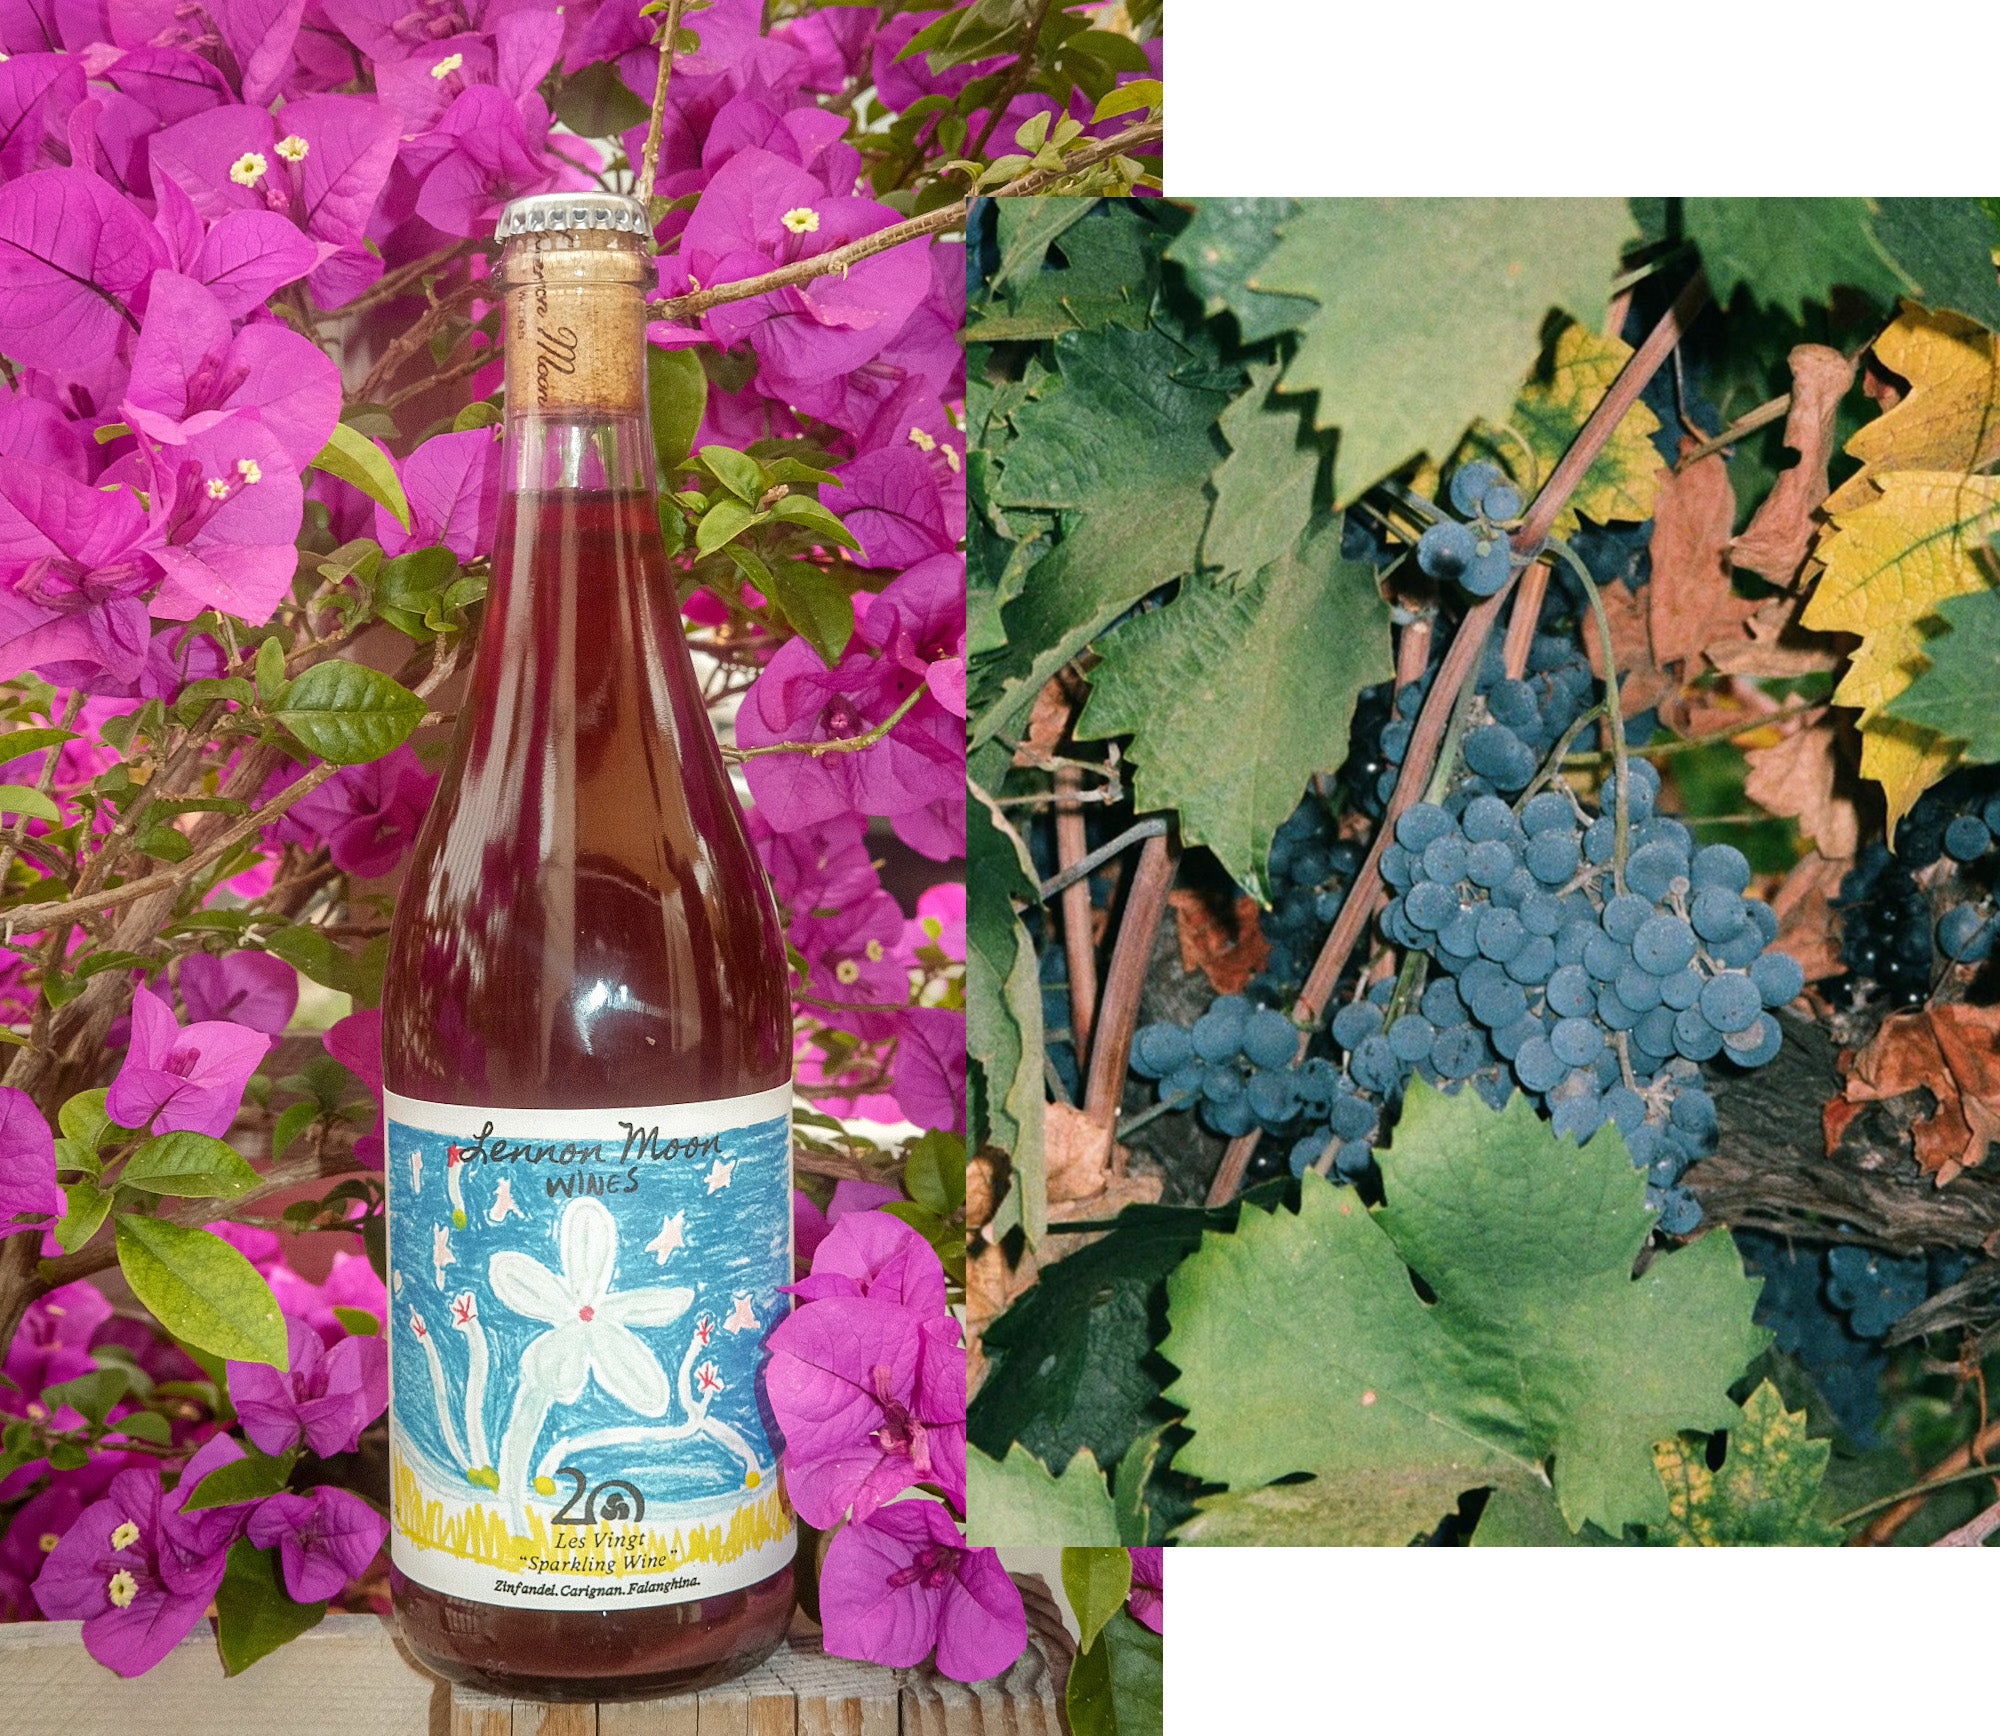 A diptych of a bottle of wine against a wall of pink flowers, and some grapes on a vine.